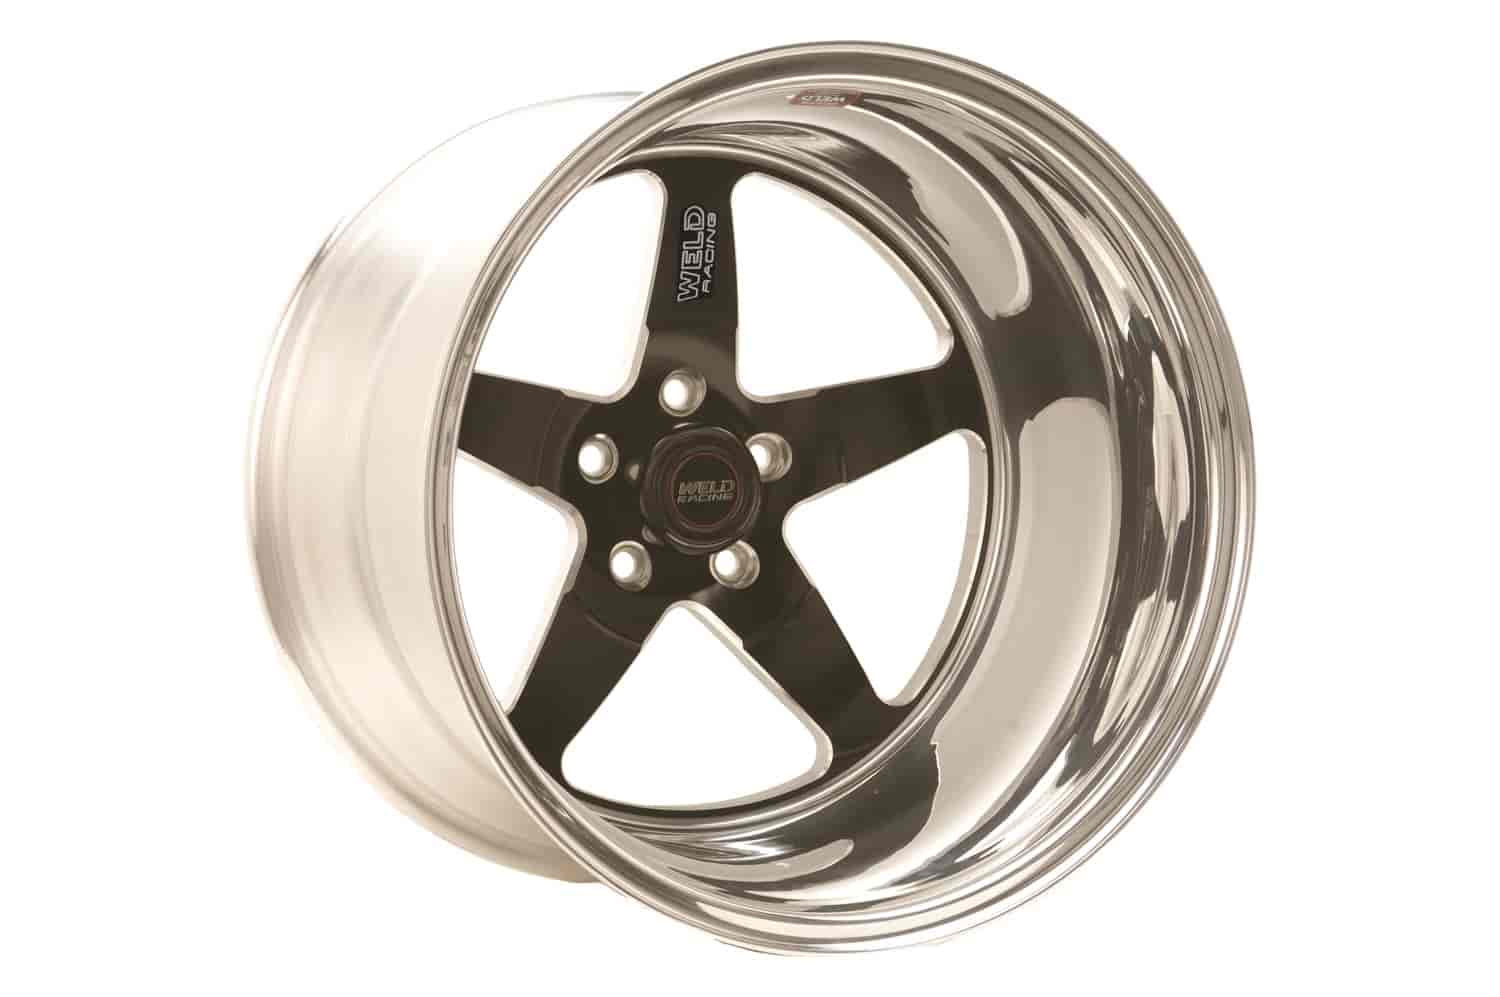 RT-S Series Wheel Size: 15" x 9" Bolt Circle: 5 x 4-3/4" Back Space: 5-1/2"